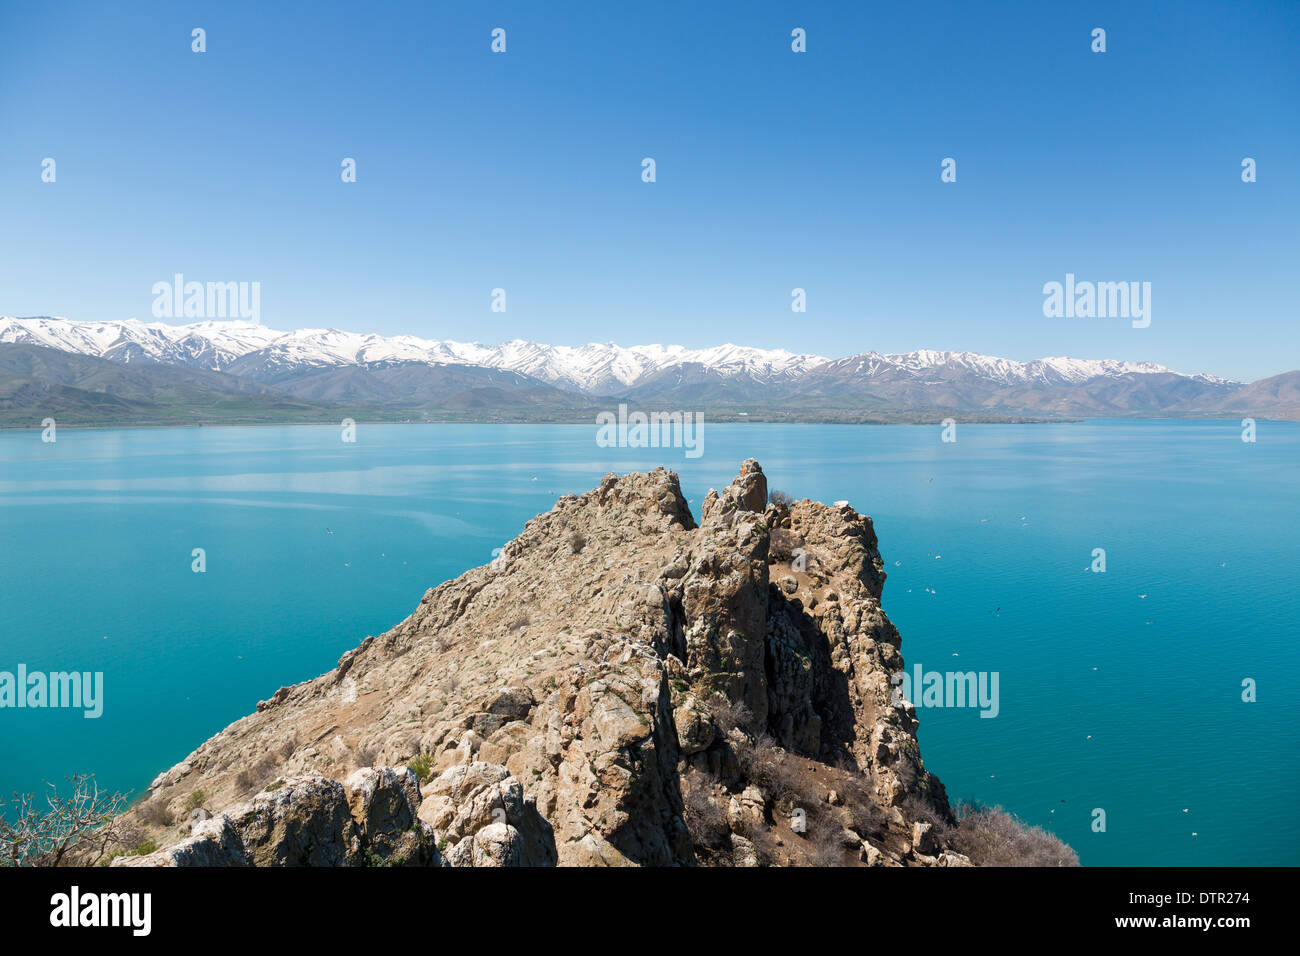 view of snow-capped mountains of Eastern Turkey from Aghtamar Island, Lake Van. Stock Photo